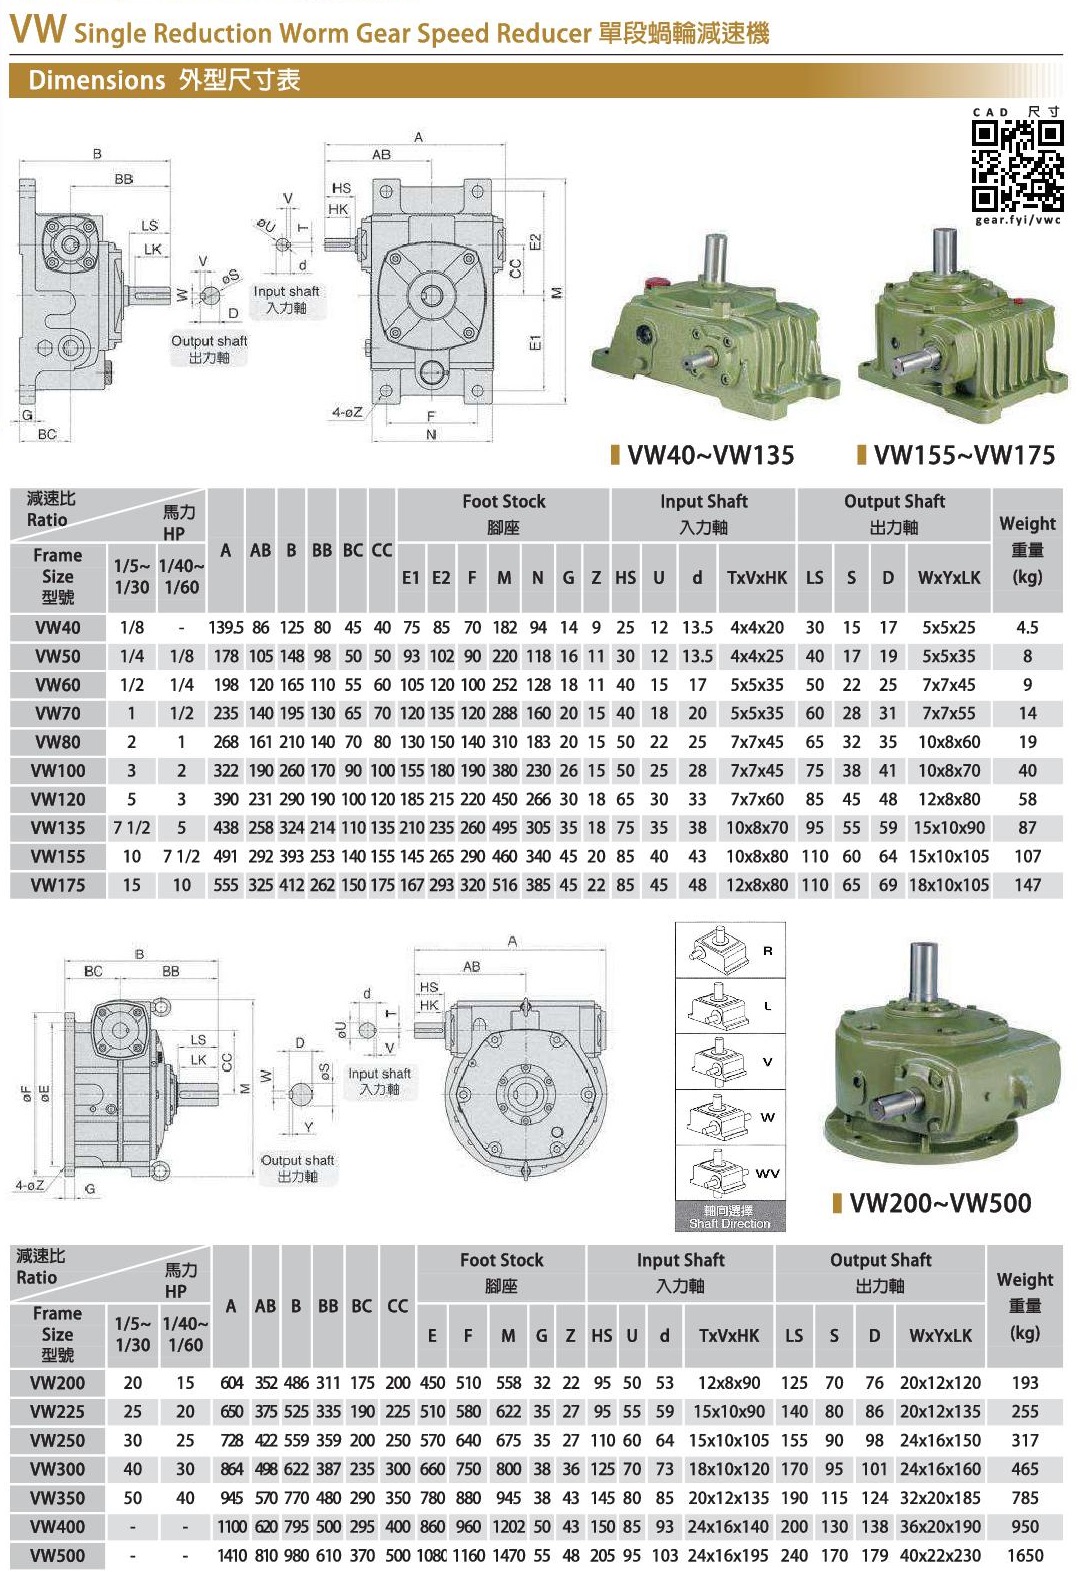 VW worm gearbox dimensions